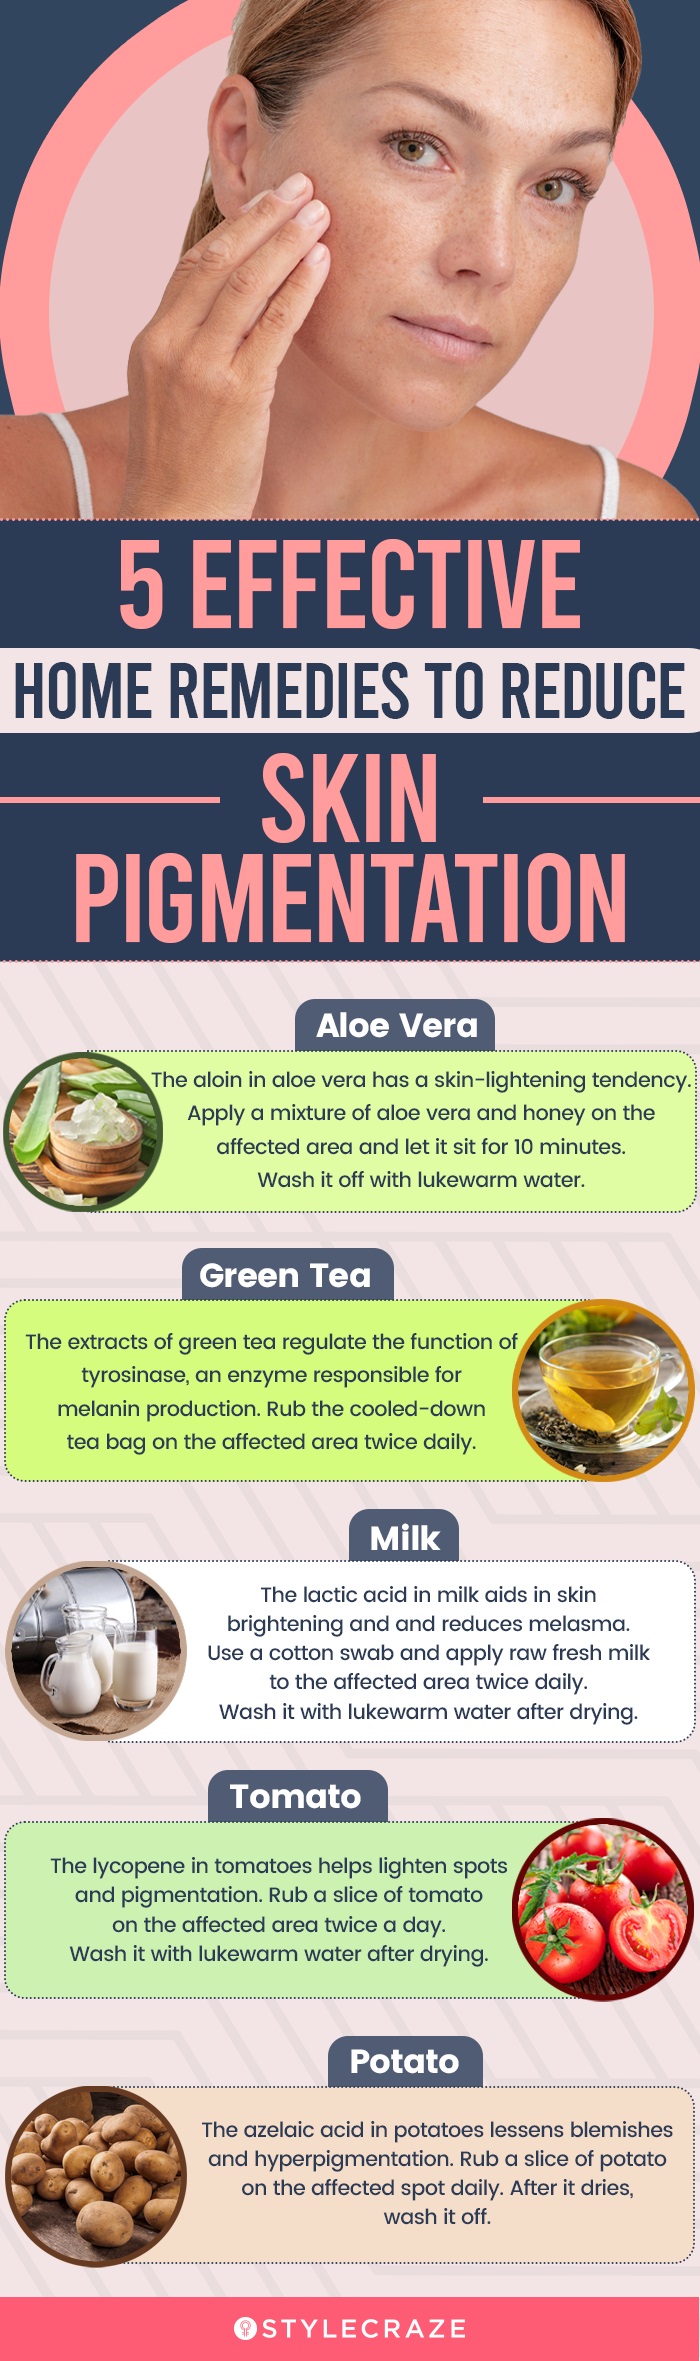 5 effective home remedies to reduce skin pigmentation (infographic)